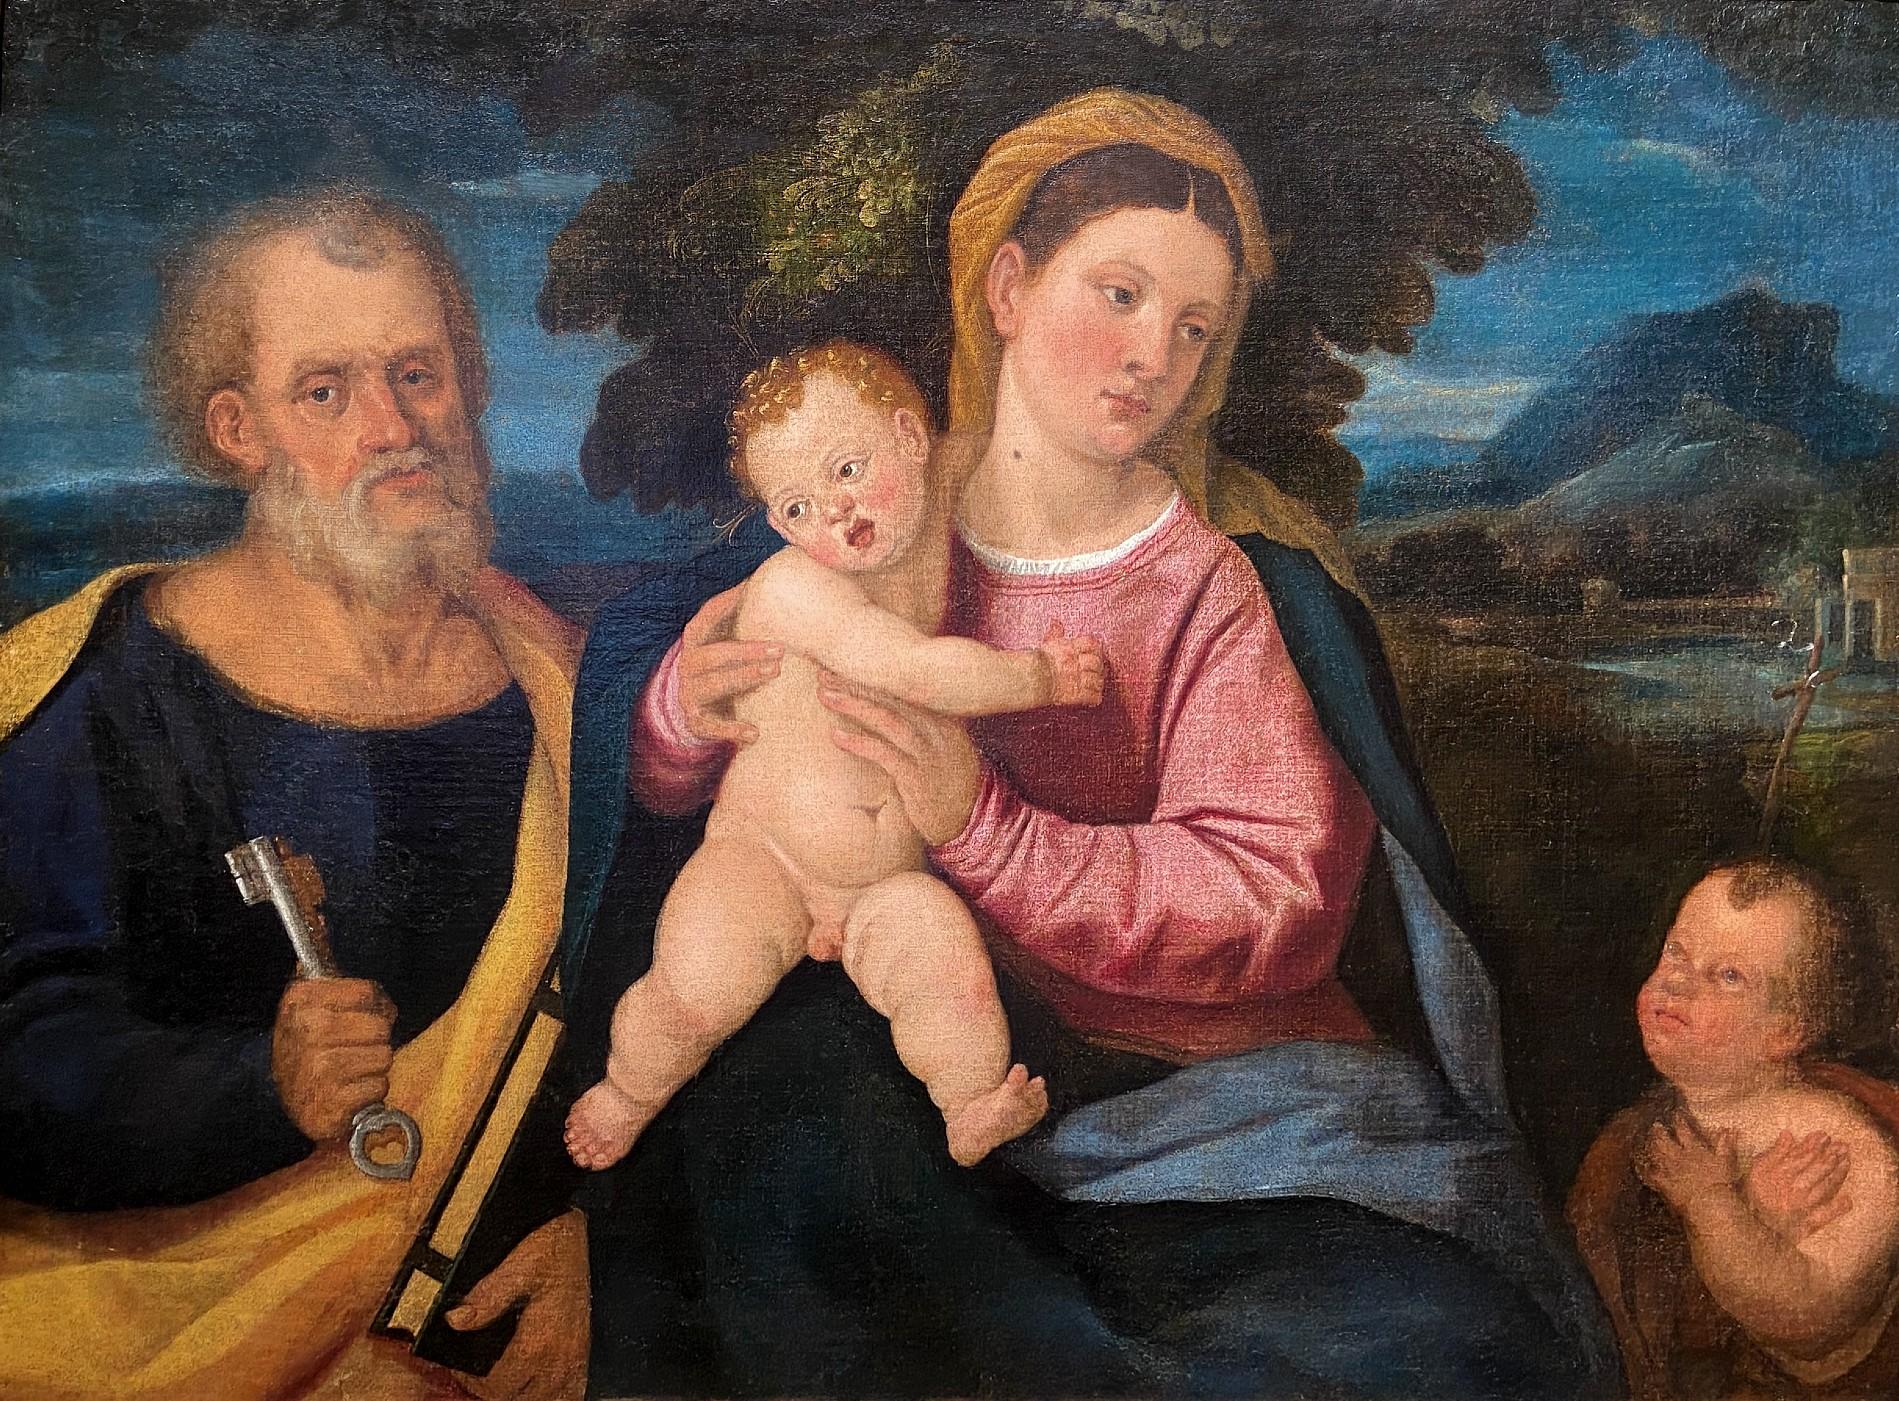 Oil on canvas
Image size: 26 x 37 inches (66 x 94 cm)
Period hand carved gilt frame

The pictorial arrangement of the Holy Family, with various saints in a landscape, was very popular in sixteenth-century Venice, following the prototype of Giovanni